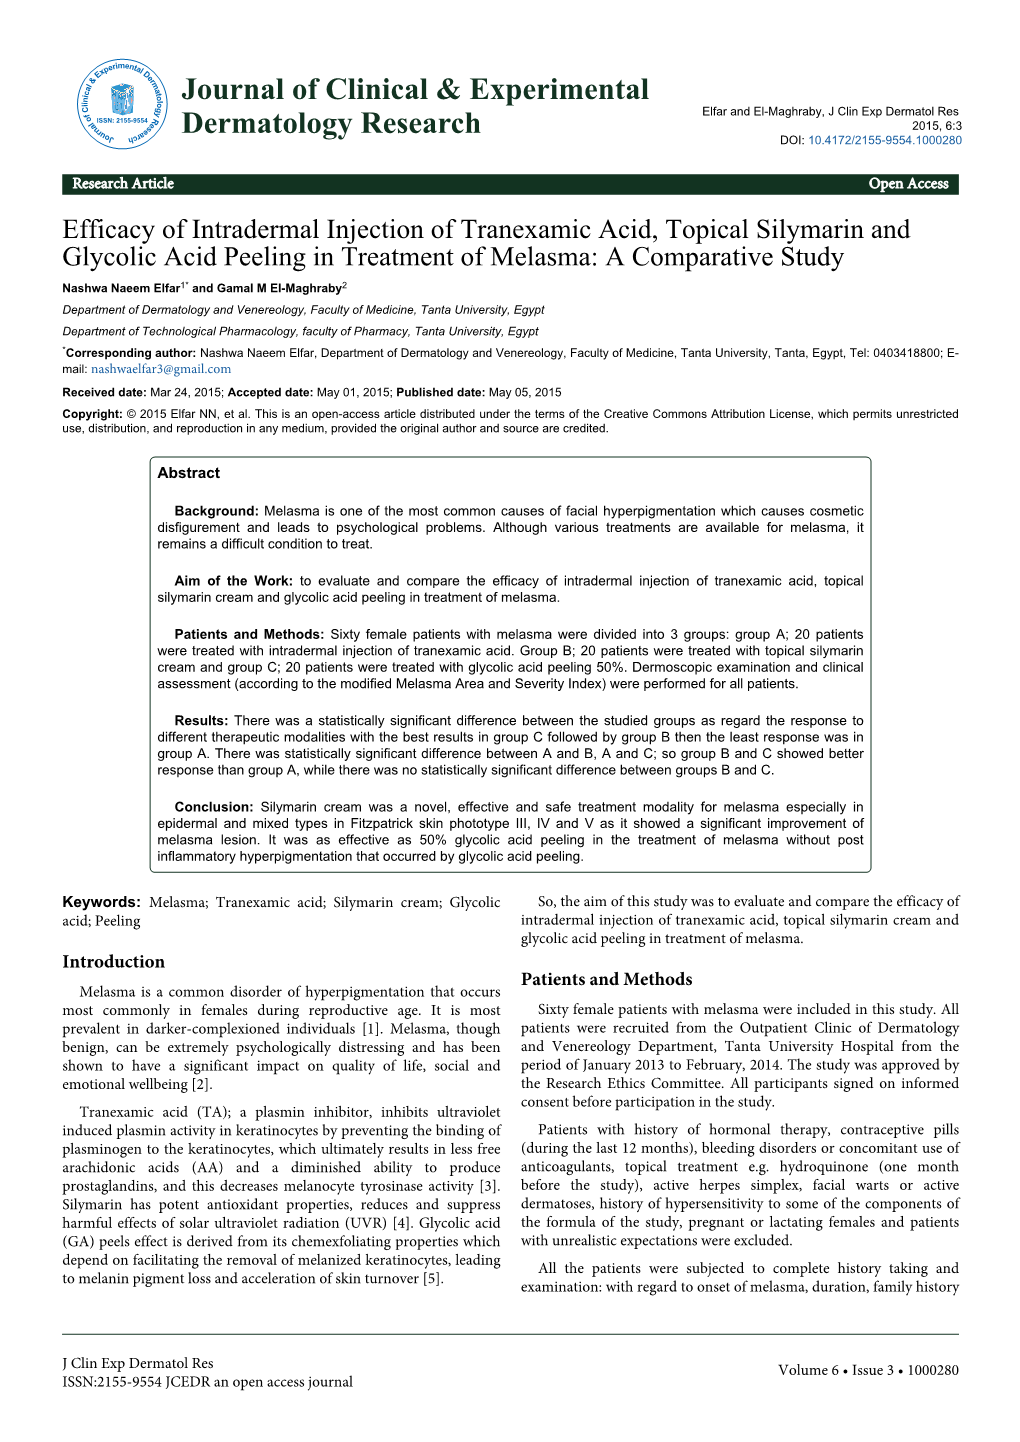 Efficacy of Intradermal Injection of Tranexamic Acid, Topical Silymarin